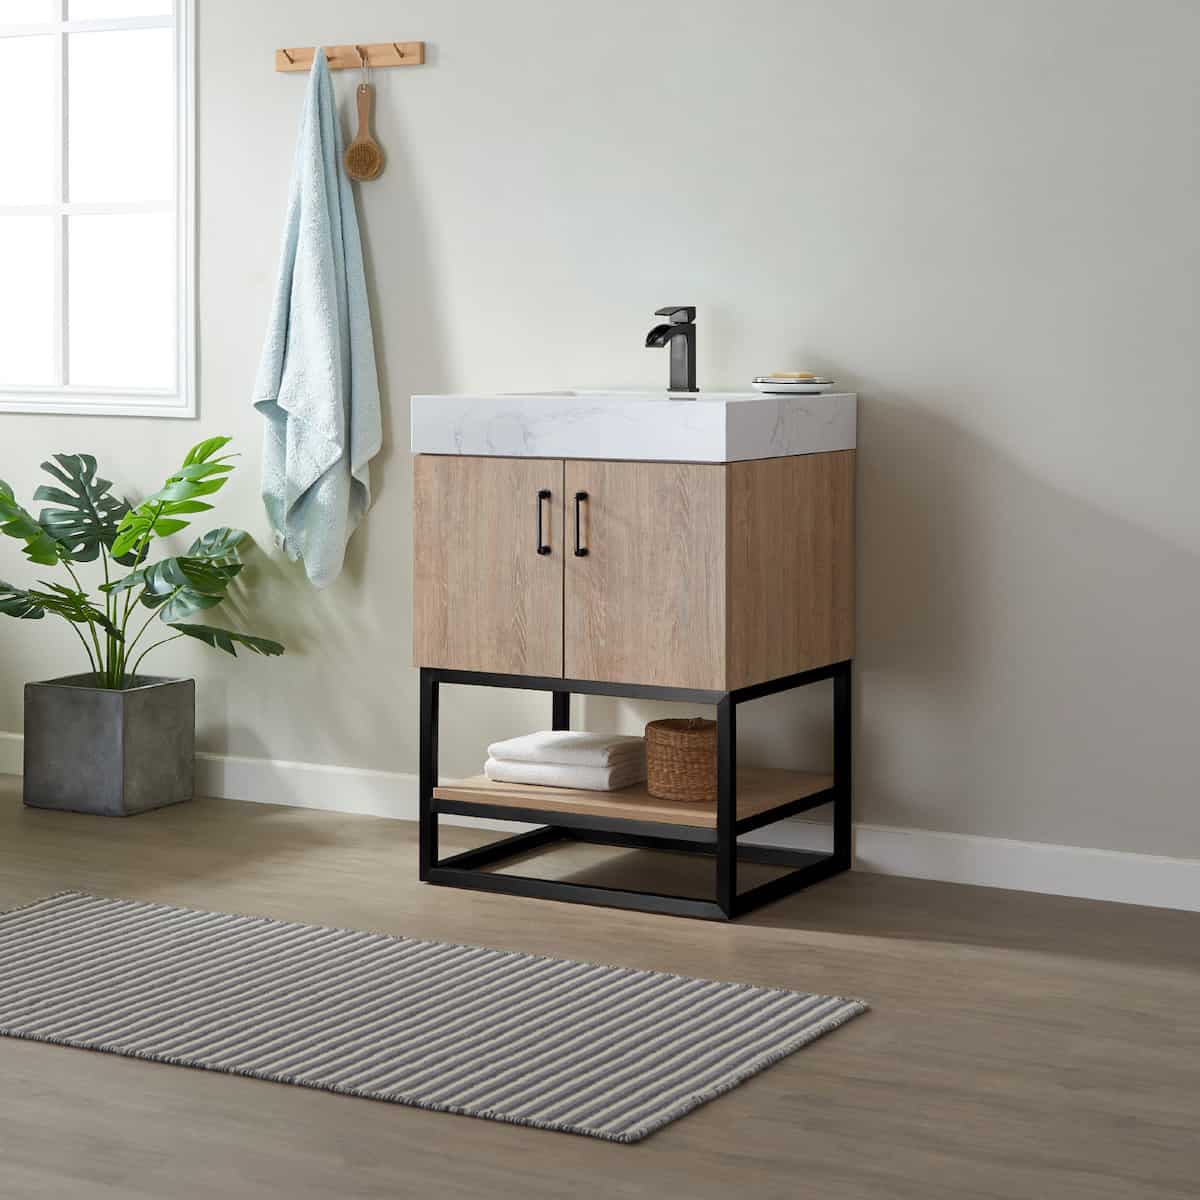 Vinnova Alistair 24 Inch Freestanding Single Vanity in North American Oak and Matte Black Frame with White Grain Stone Countertop Without Mirror Side 789024B-NO-GW-NM